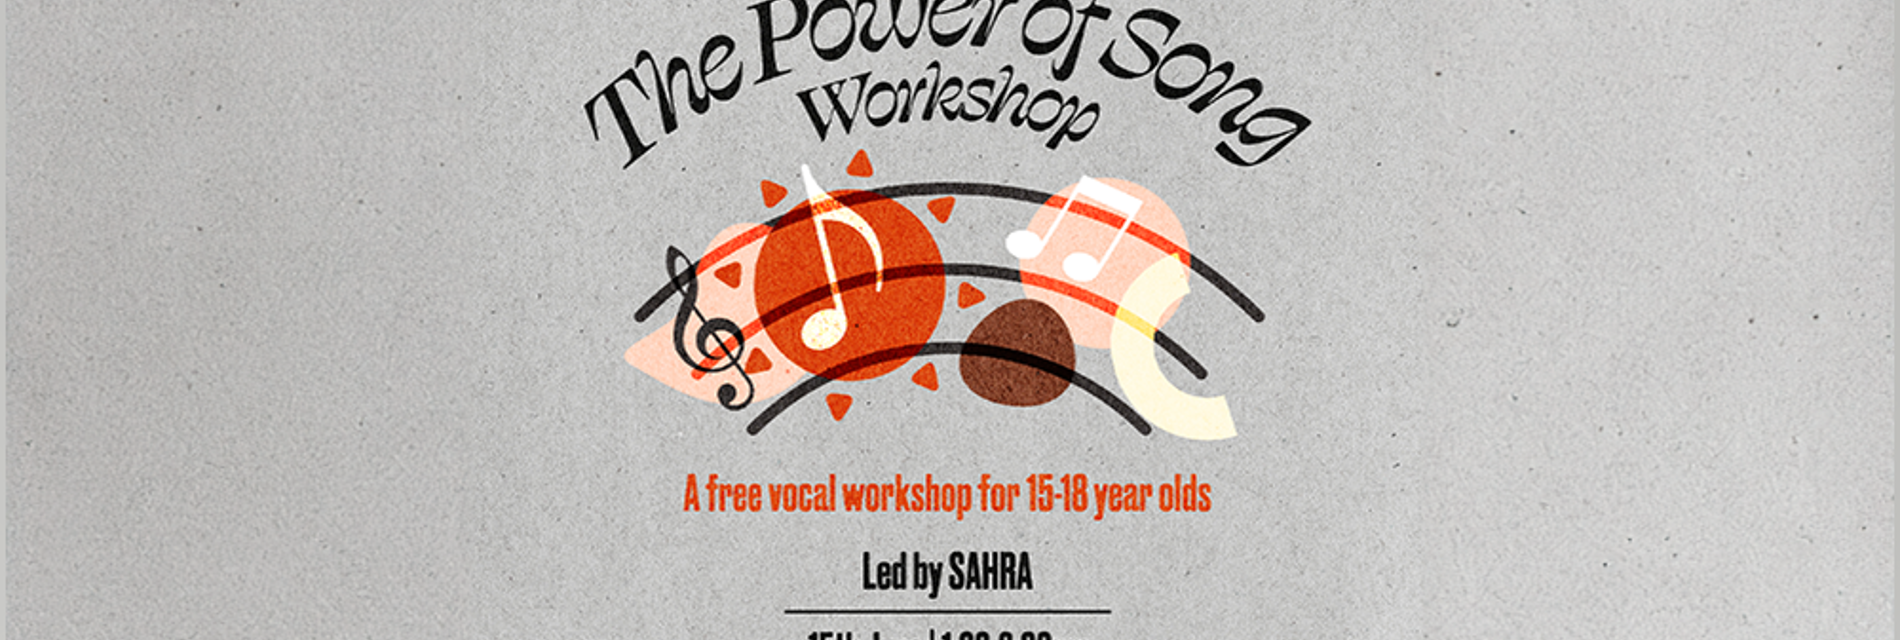 The Power of Song- Sahra Gure Workshop